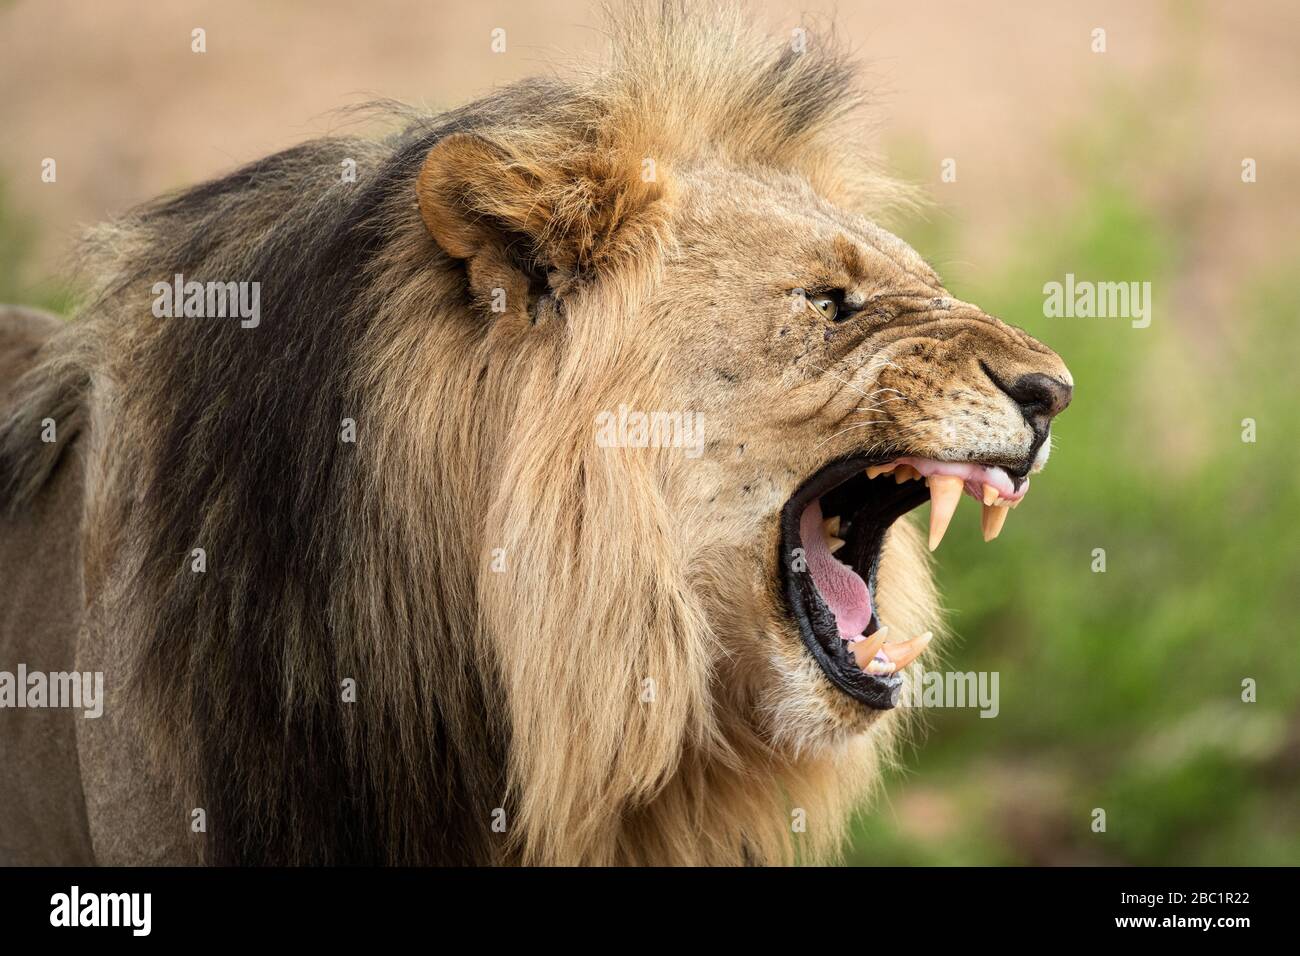 A close up dramatic profile portrait of a growling male lion, with its mouth wide open and teeth bared, taken in the Madikwe Game Reserve, South Afric Stock Photo